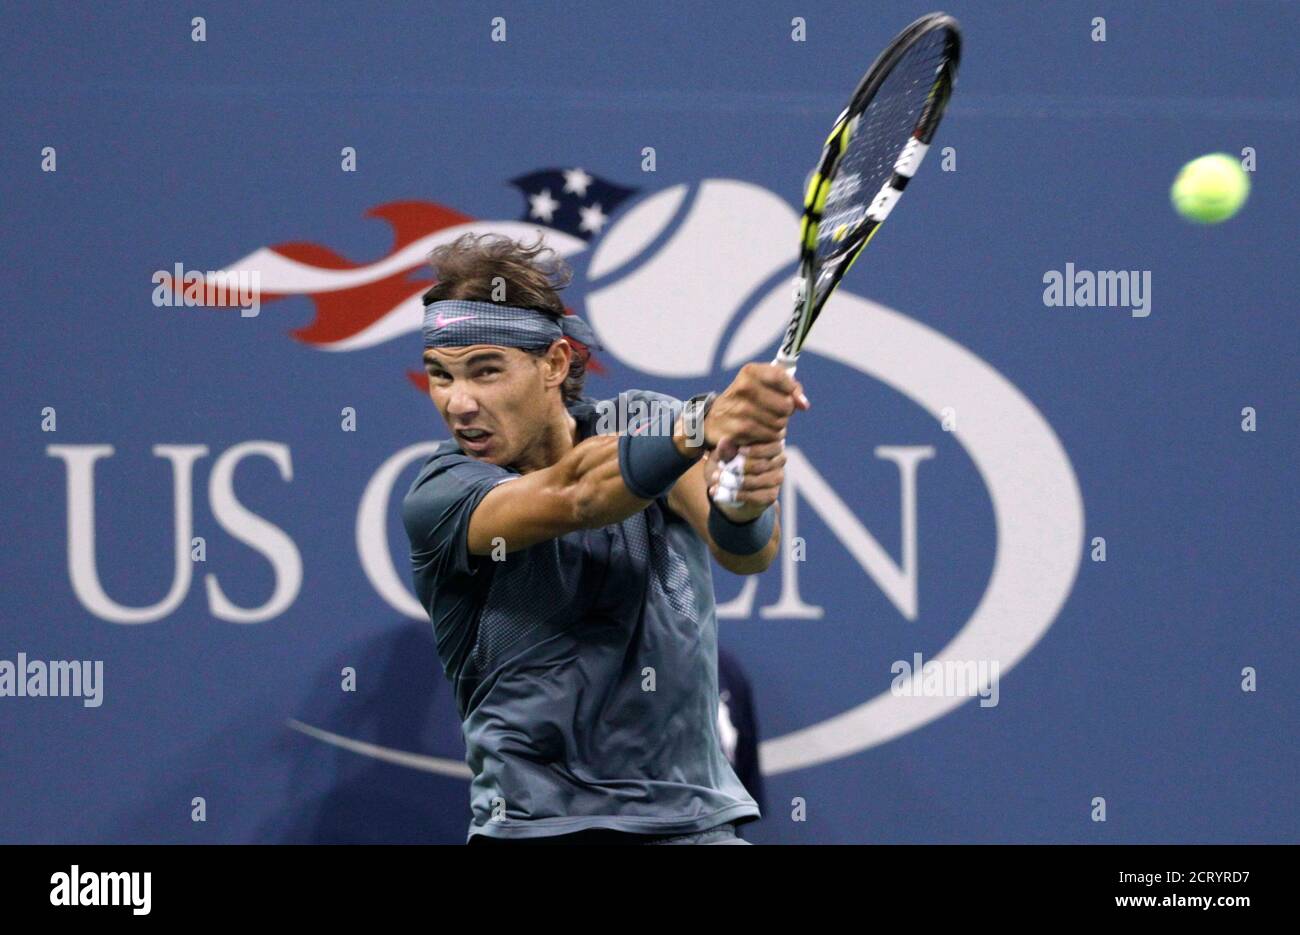 Rafael Nadal of Spain returns a volley to Rogerio Dutra Silva of Brazil at the U.S. Open tennis championships in New York, August 29, 2013. REUTERS/Shannon Stapleton (UNITED STATES - Tags: SPORT TENNIS) Stock Photo